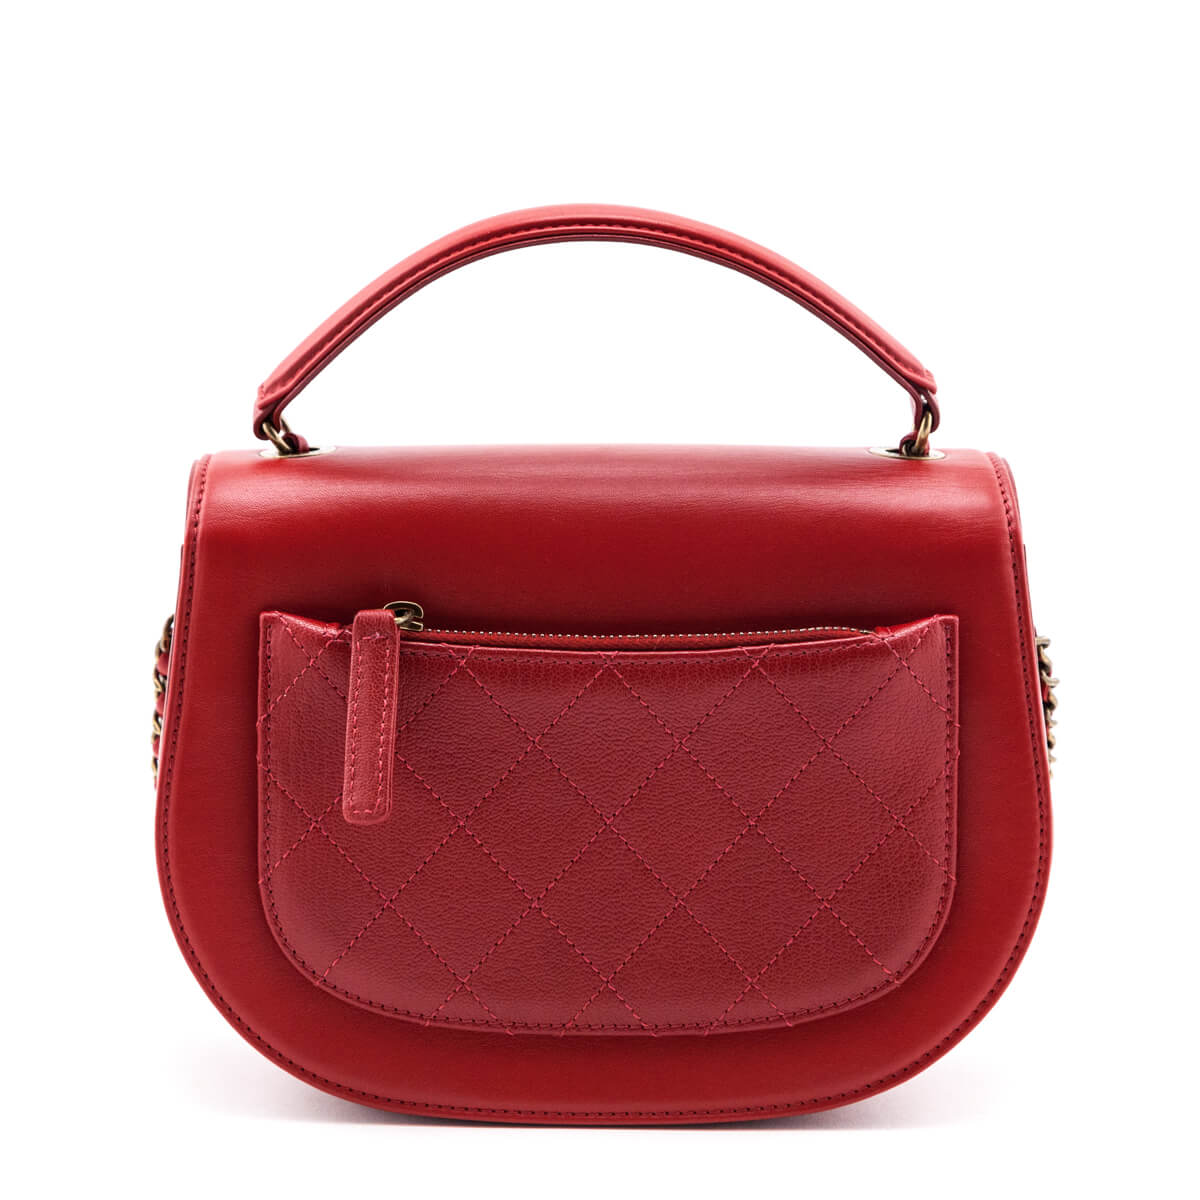 Chanel Red Shiny Calfskin & Quilted Goatskin Small Coco Curve Messenger Flap Bag - Love that Bag etc - Preowned Authentic Designer Handbags & Preloved Fashions